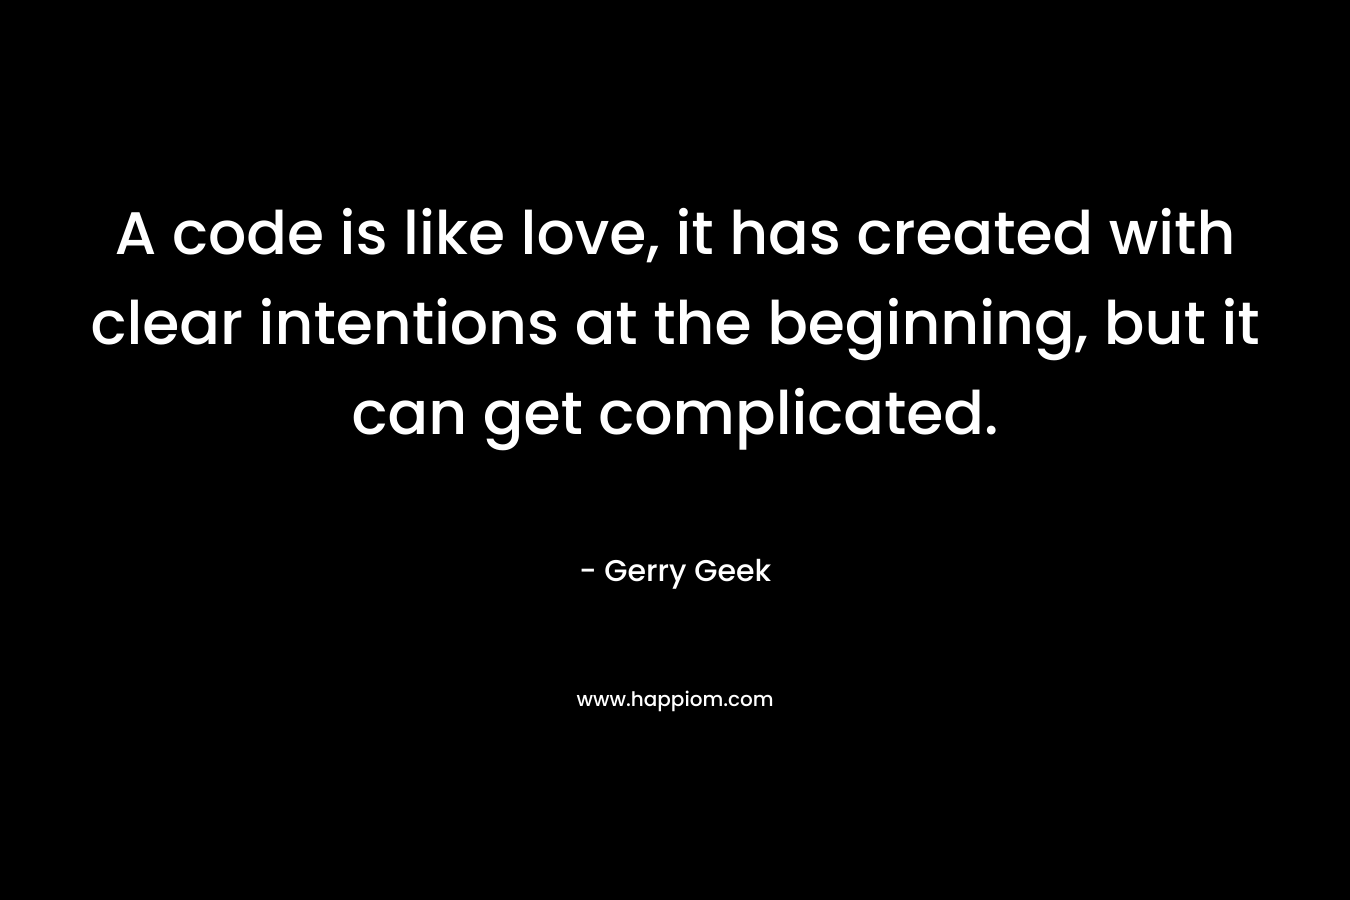 A code is like love, it has created with clear intentions at the beginning, but it can get complicated. – Gerry Geek